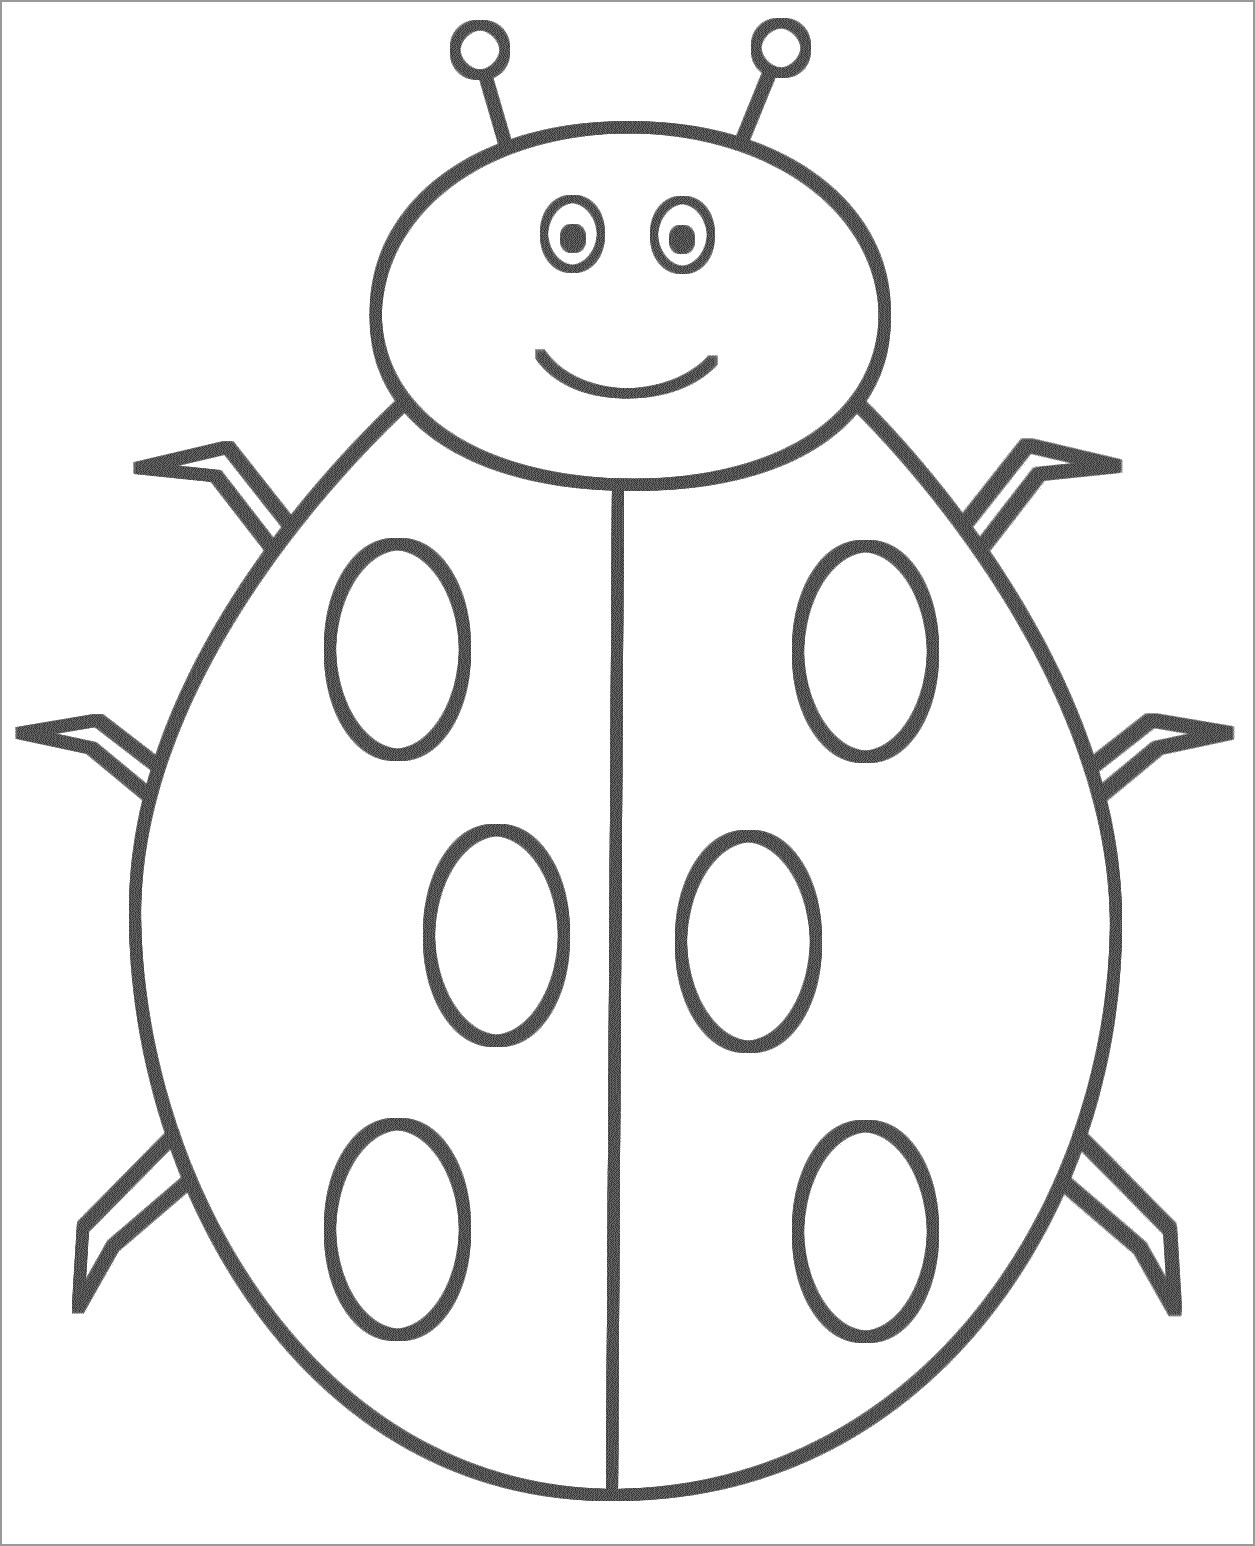 Easy Ladybug Coloring Page for Kids